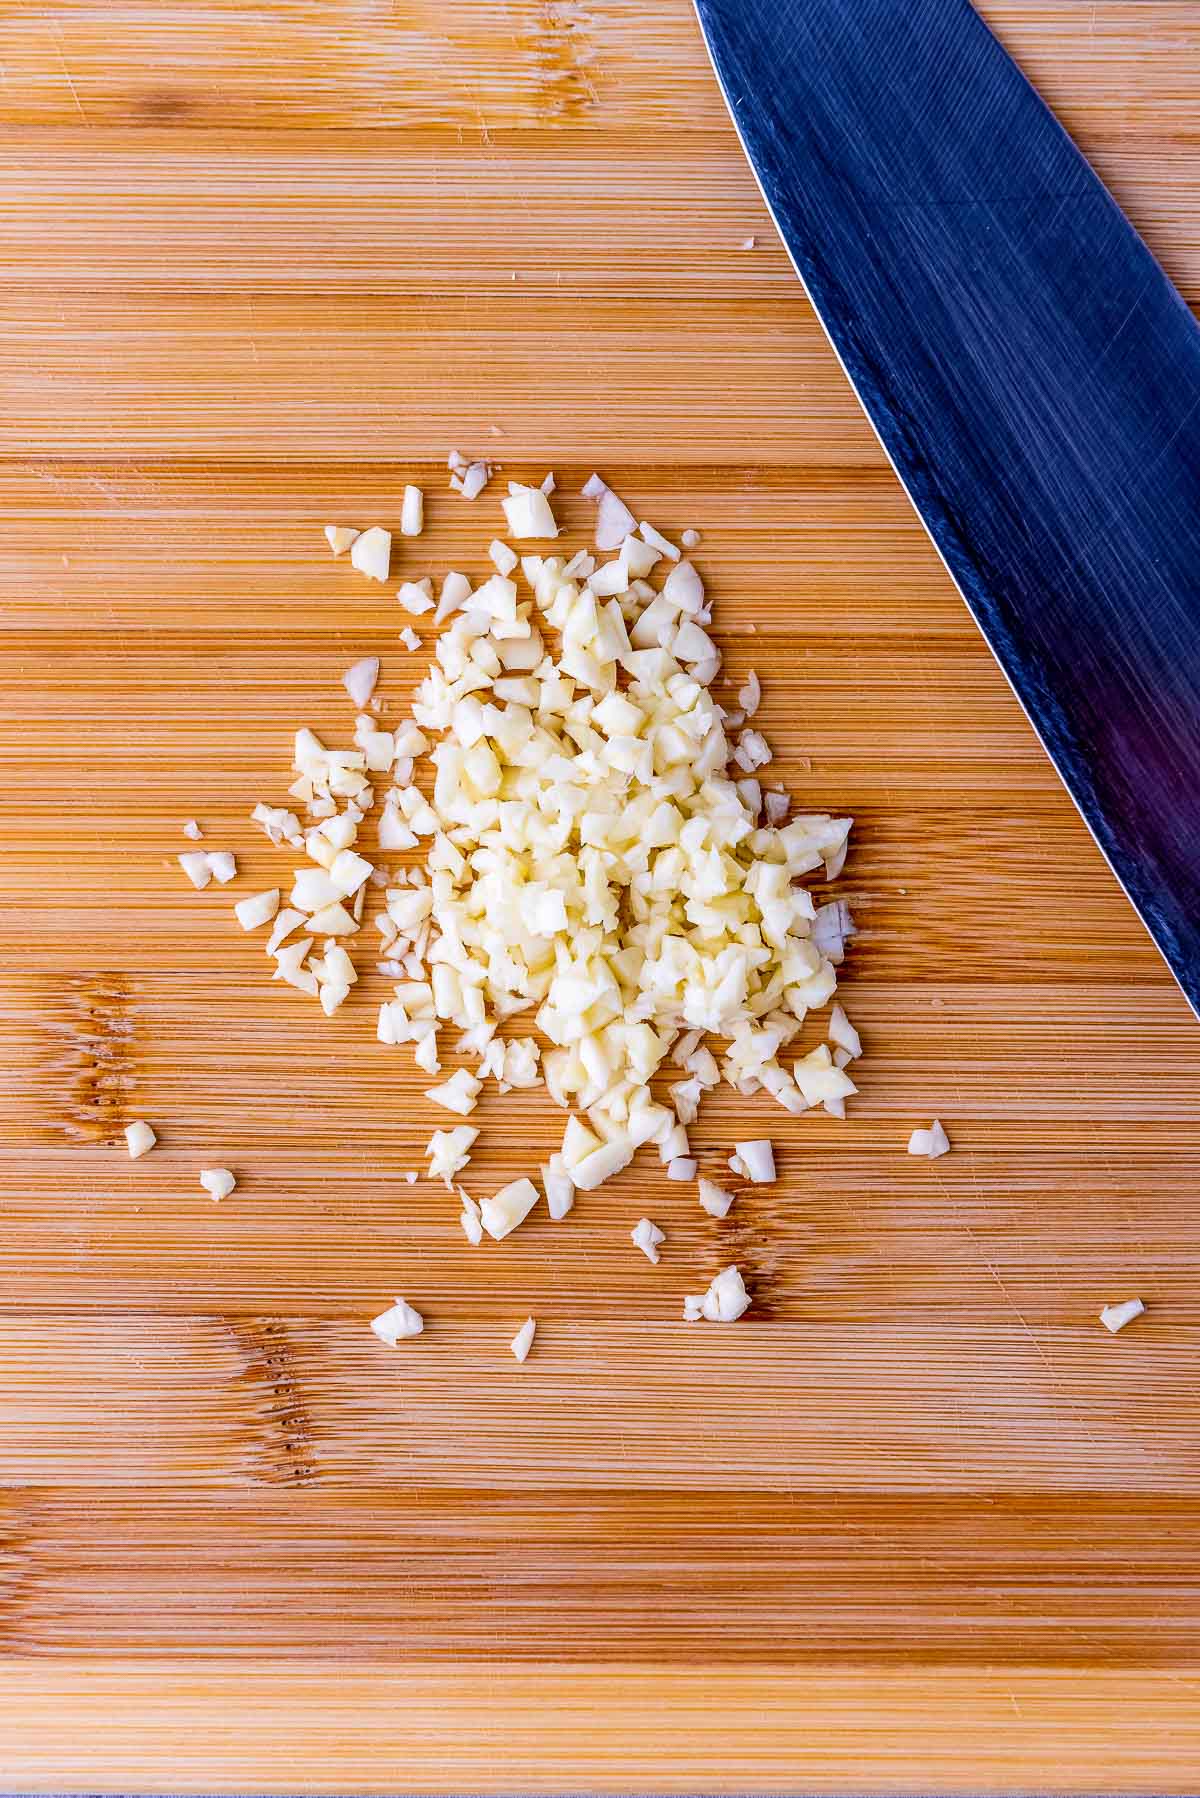 Minced garlic on a wooden cutting board with a large knife on the side.